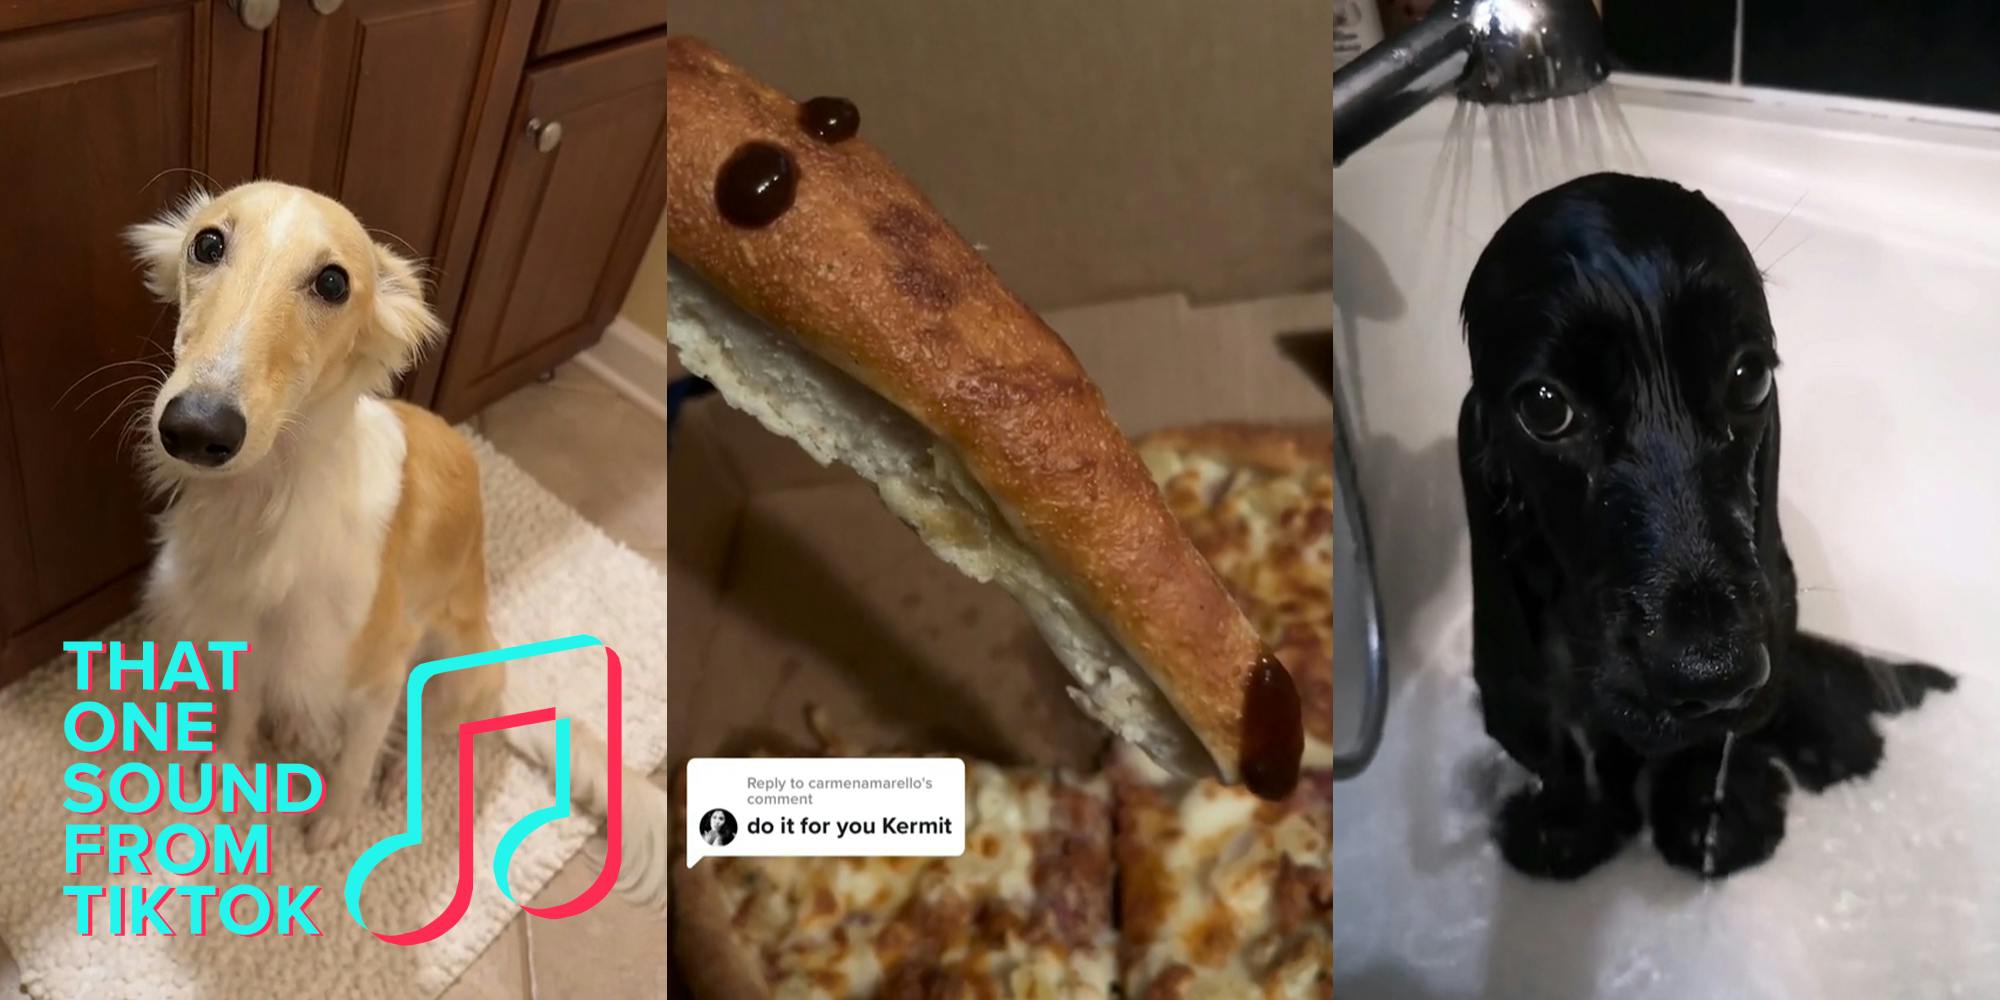 dog sitting on bathroom floor with That One Sound From TikTok logo (l) bread with sauce that looks like long face dog with caption "do it for you Kermit" (c) sad dog in bathtub with shower running (r)